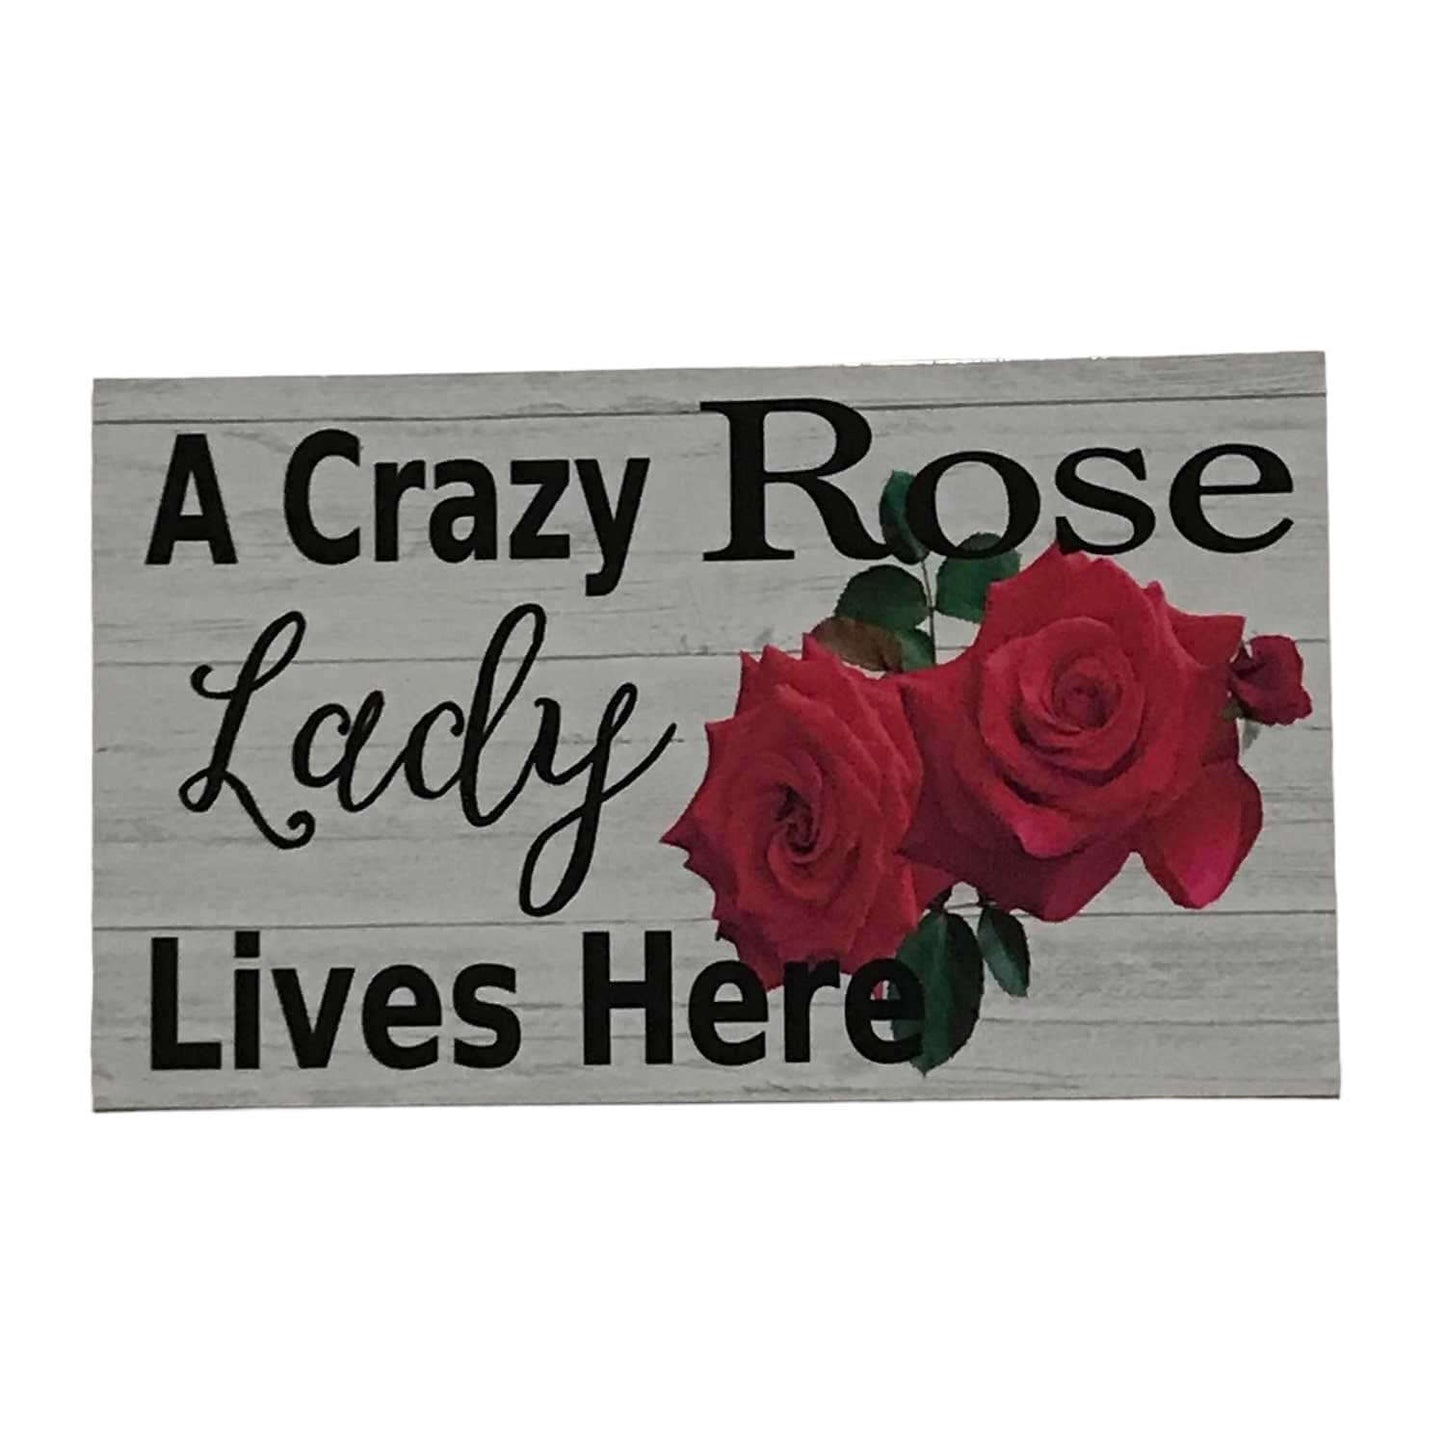 Crazy Rose Lady Lives Here Sign - The Renmy Store Homewares & Gifts 